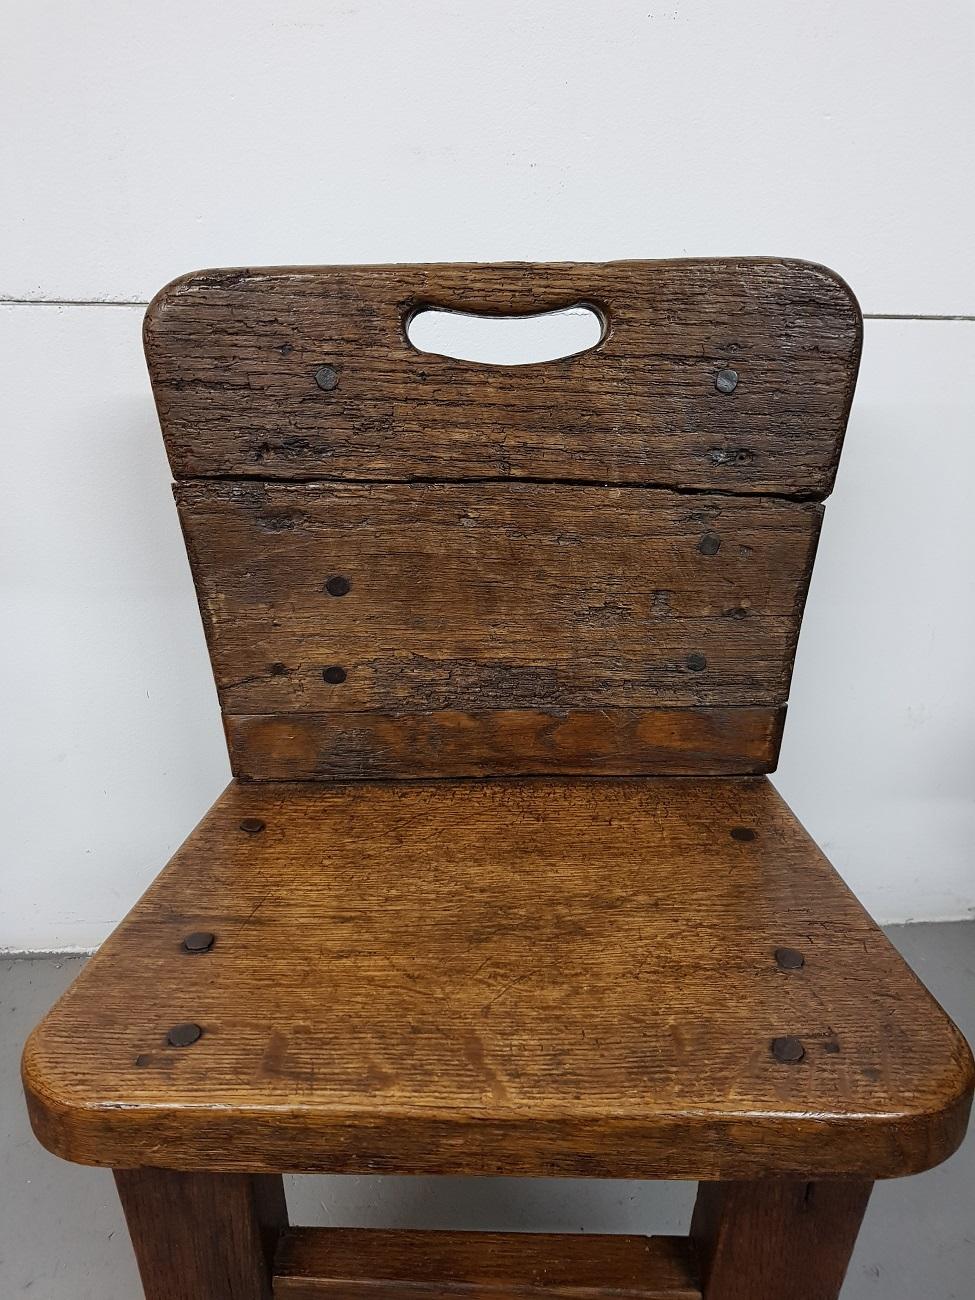 Lovely handmade old wooden rural farmers children chair made of thick planks fastened with wooden pins, 19th century or early 20th century.

The measurements are,
Depth 35.5 cm/ 13.9 inch.
Width 38.5 cm/ 15.1 inch.
Height 59 cm/ 23.2